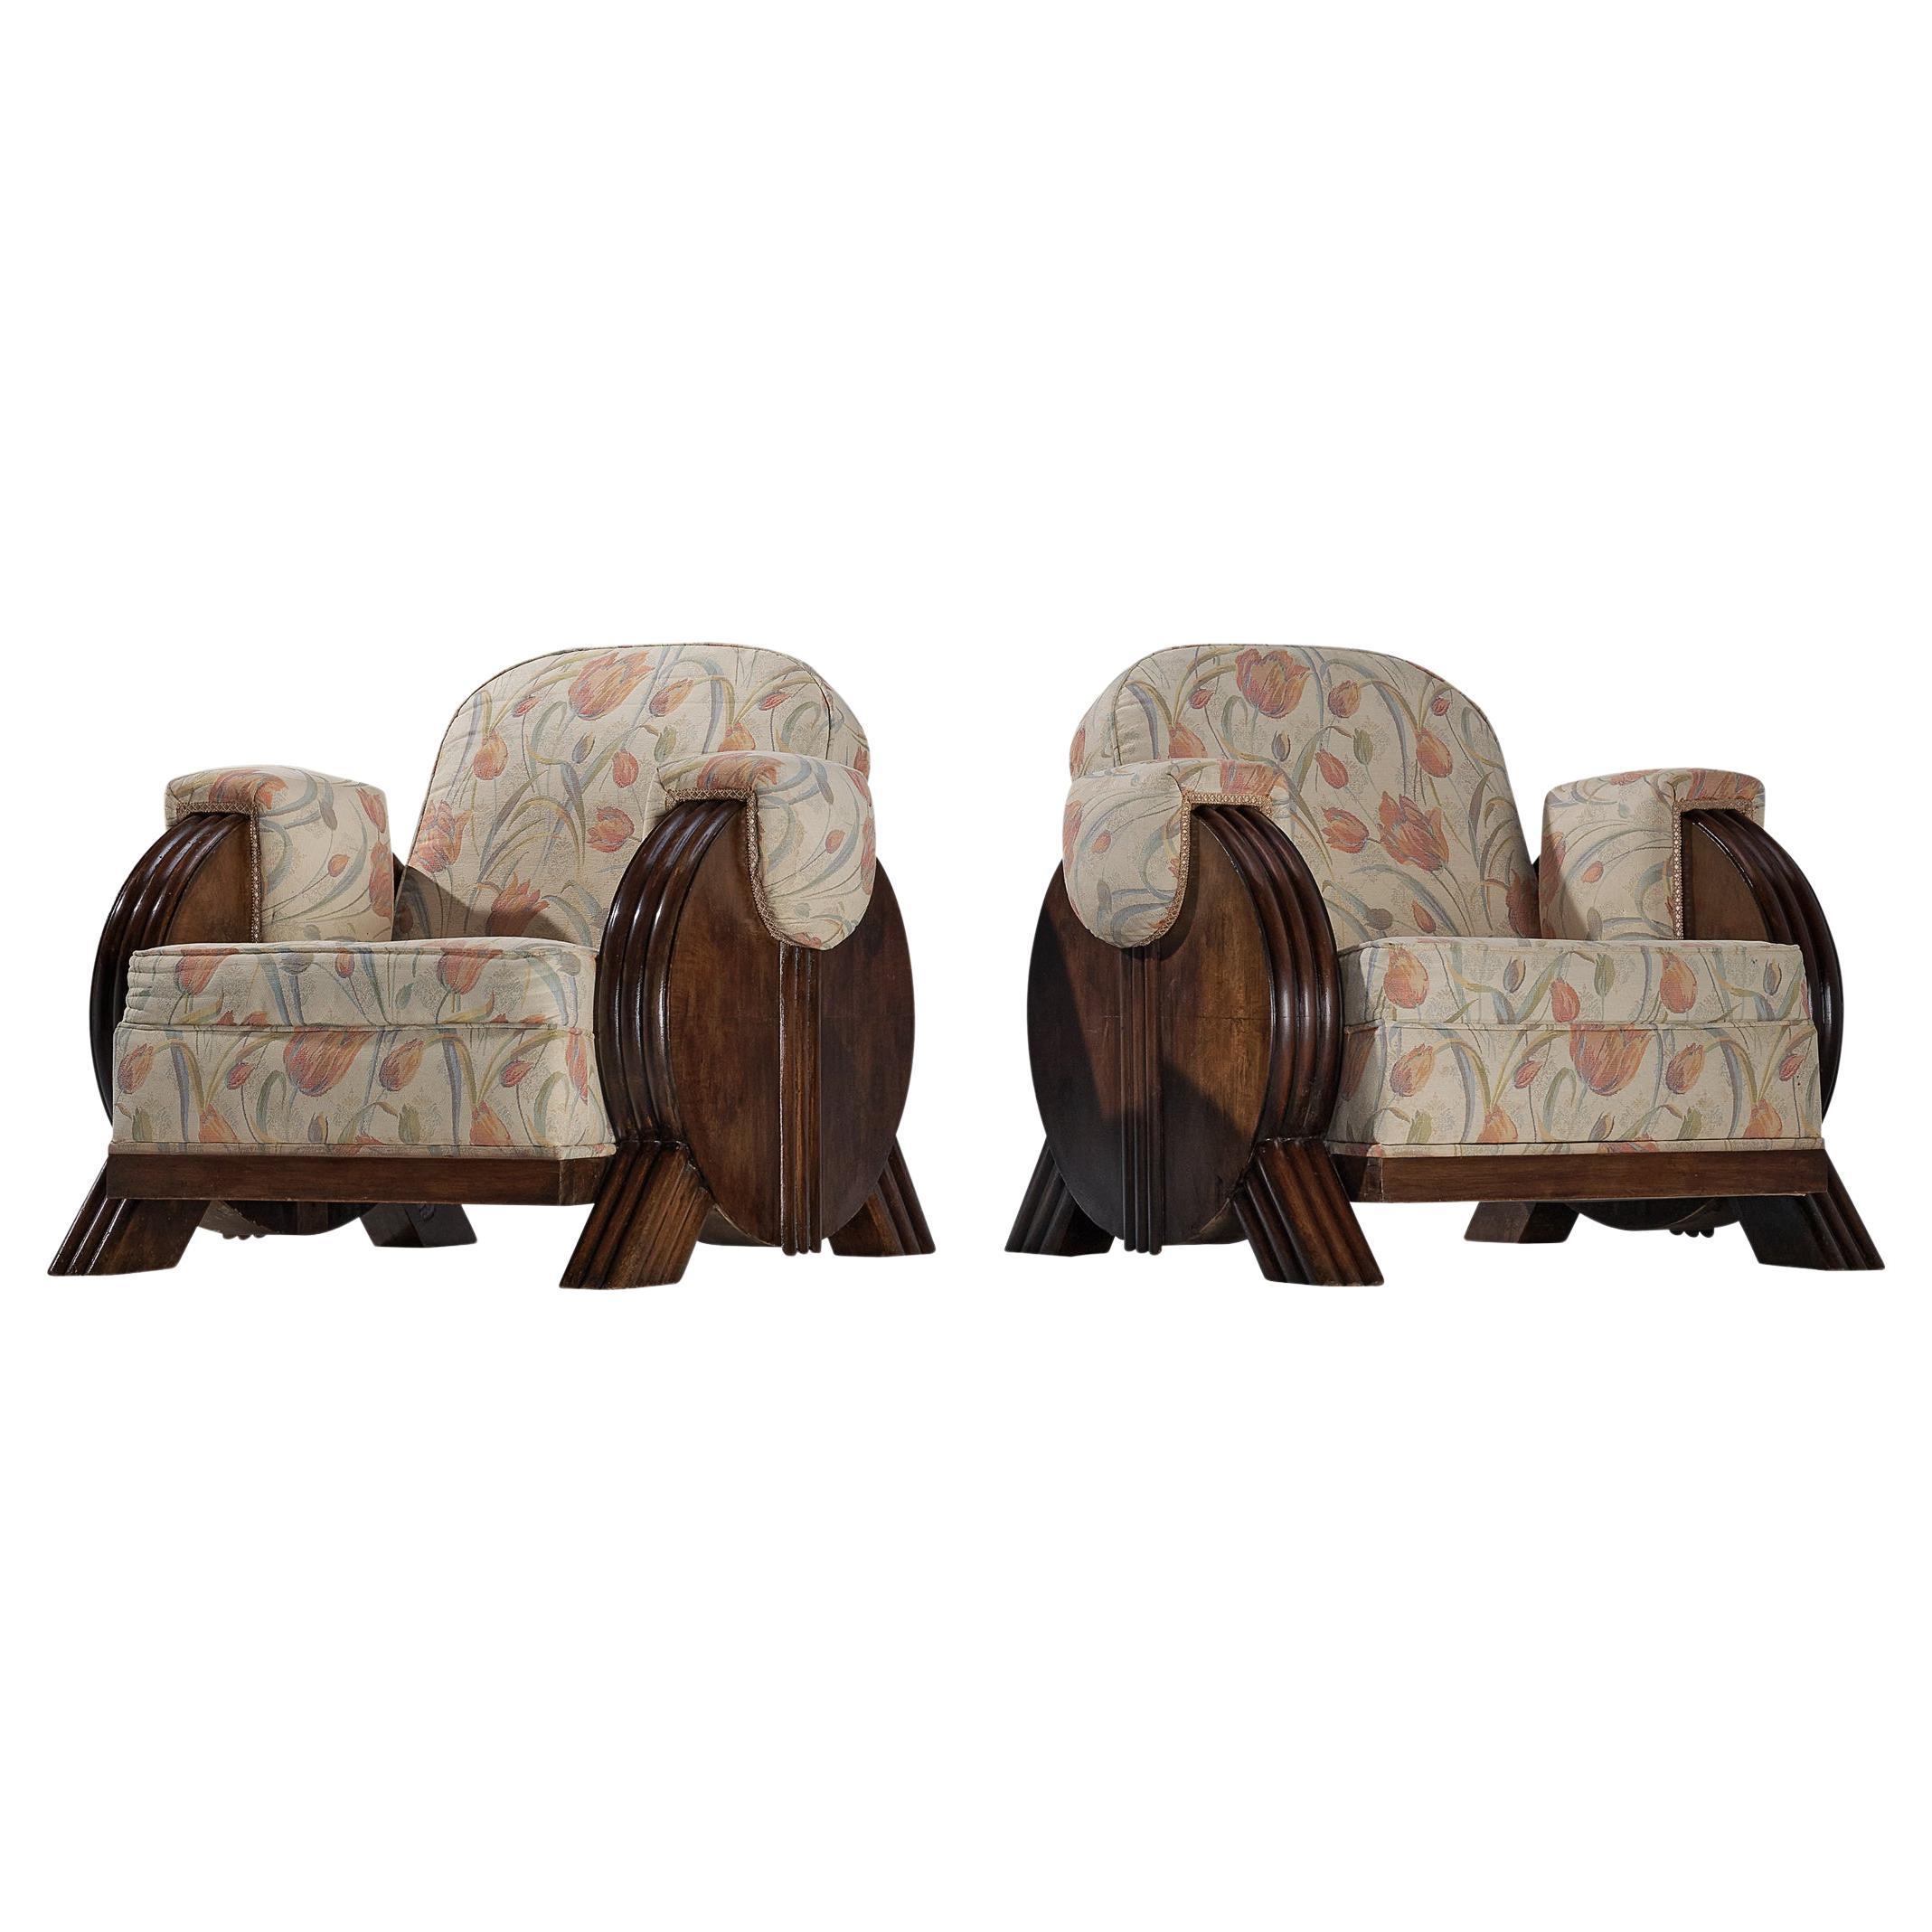 Italian Art Deco Pair of Lounge Chairs in Floral Upholstery and Wood For Sale